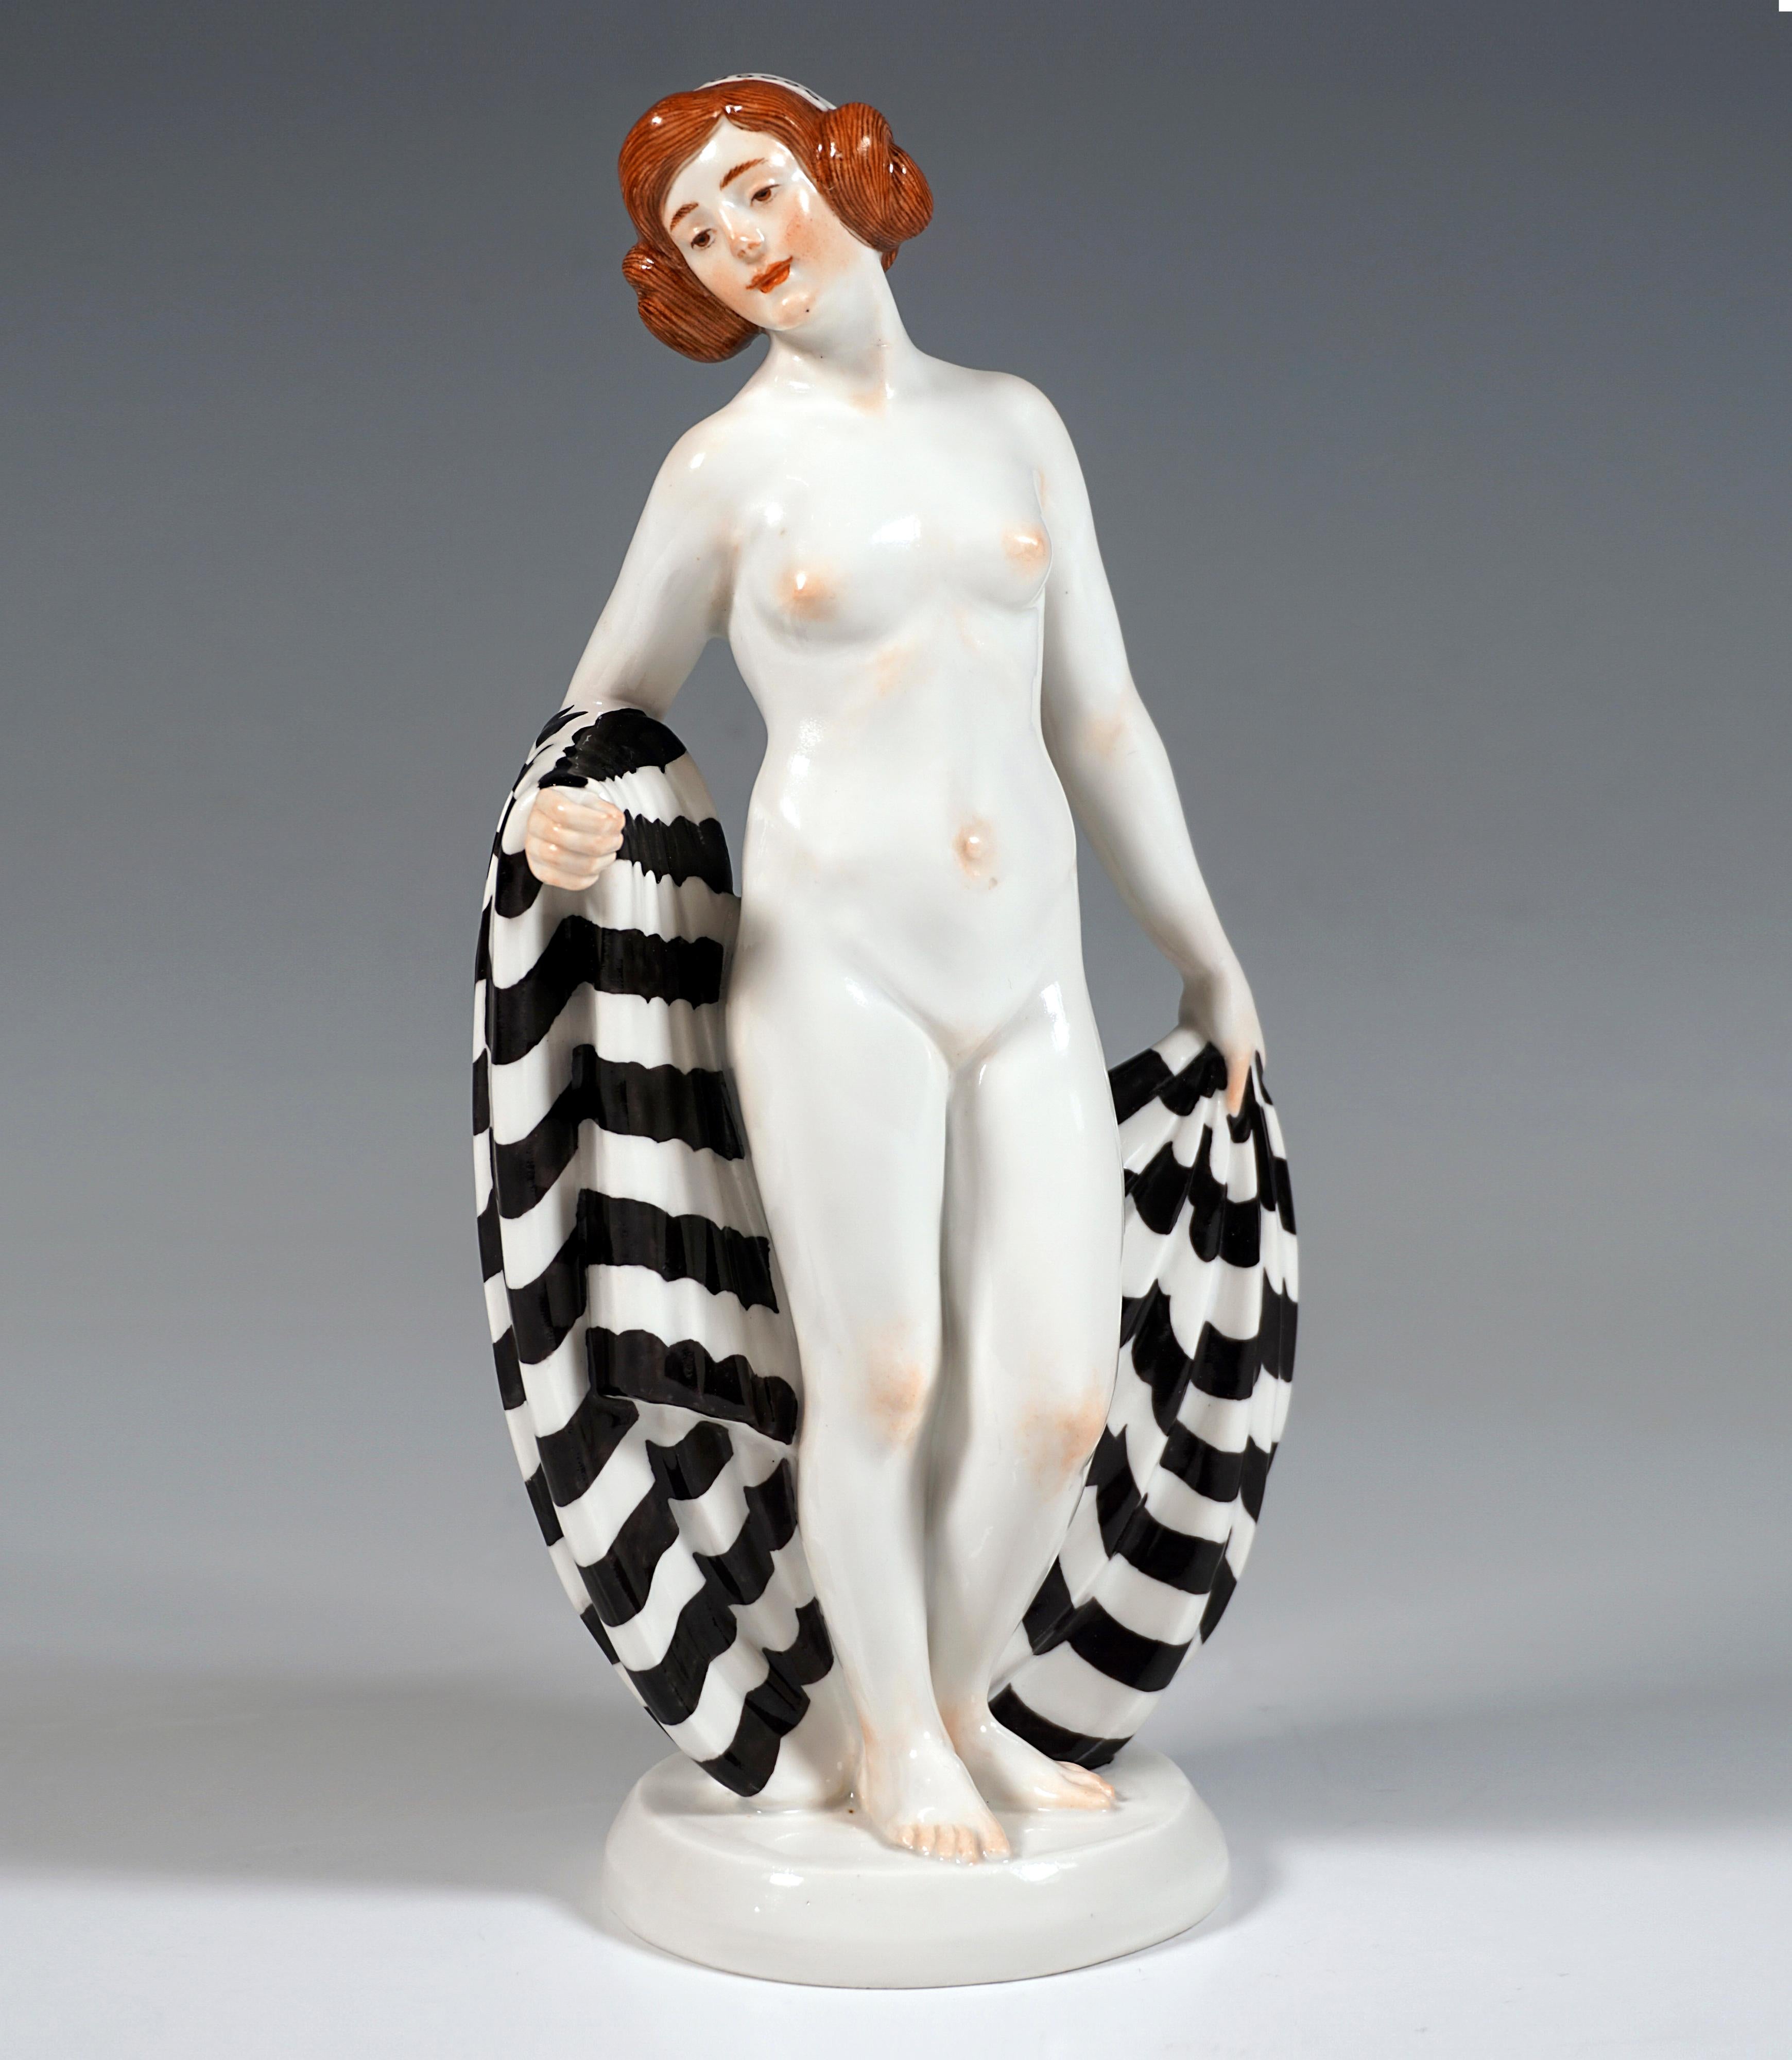 Depiction of a young unclothed Art Nouveau girl with artfully pinned up hair with incorporated hood, a large striped cloth wrapped around her right forearm and holding it behind her resting on the ground with her left hand.
On round flat base with